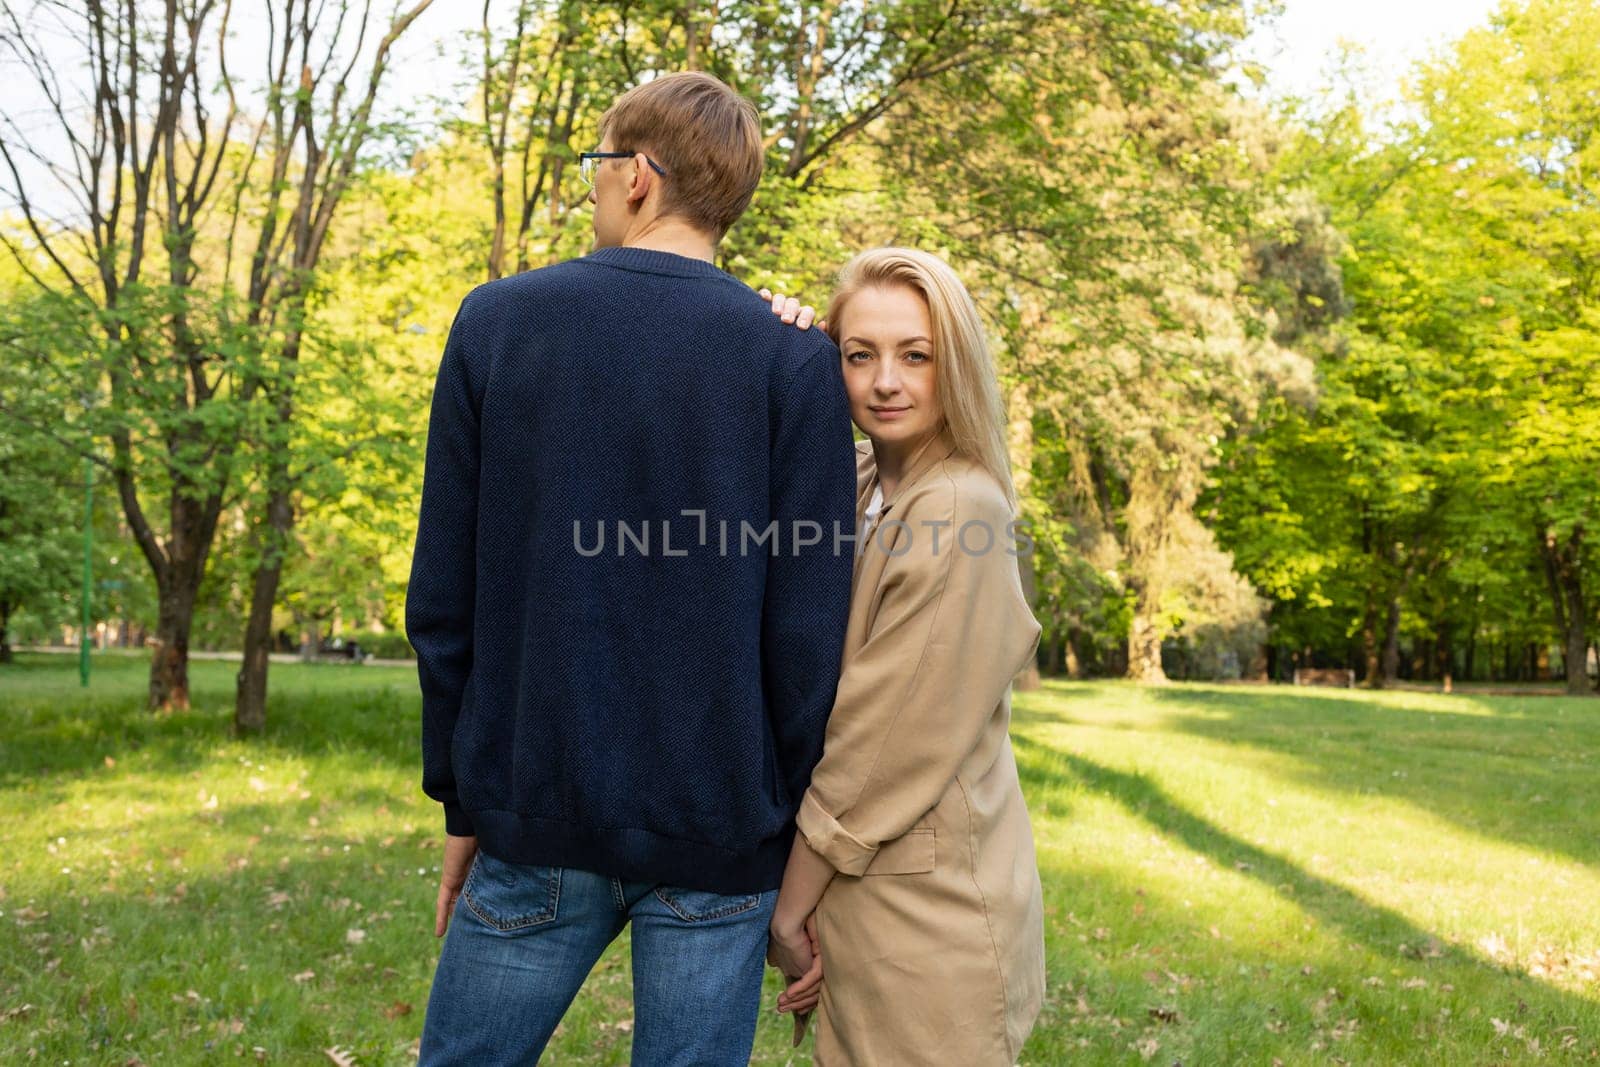 Wife And Husband Walk In Park. Woman Leans Head To Man's Shoulder. Relationship, Togetherness. Enjoying Time Together. Female Looks At Camera, Back View Of Male. Feelings. Horizontal Plane,Summer Time